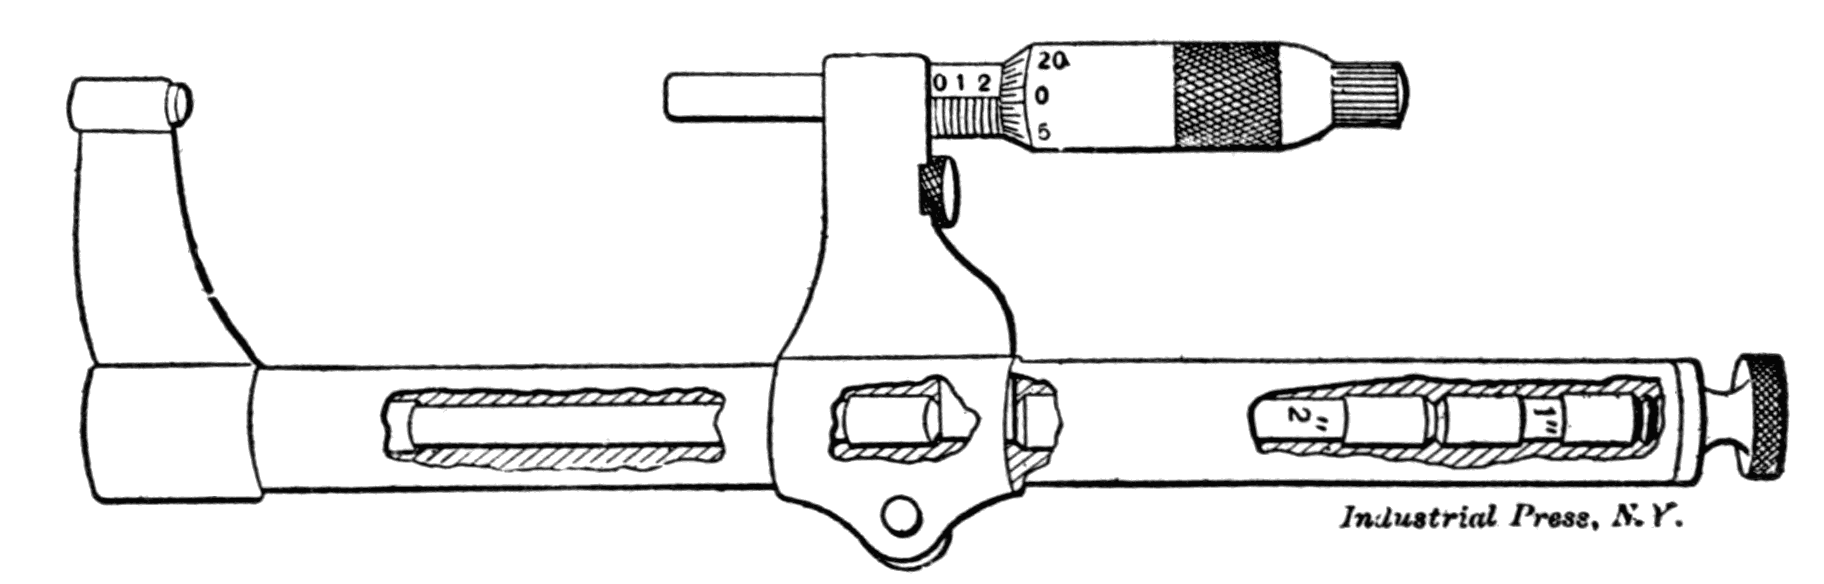 Fig. 25. Special Micrometer for Large Dimensions